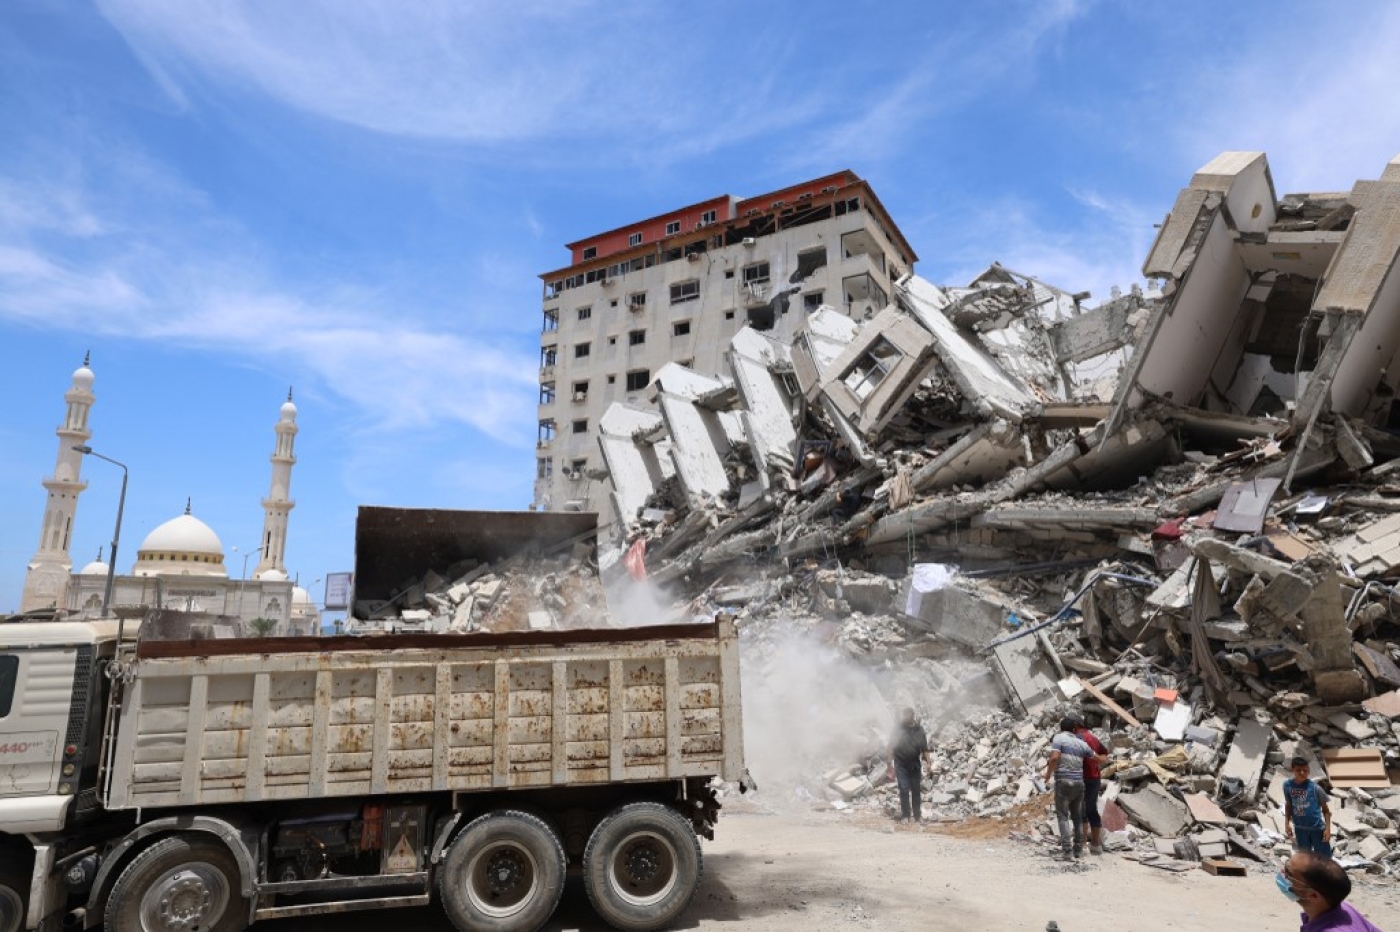 Gaza's Higher Governmental Committee for Reconstruction estimated Israel's offensive on the besieged strip resulted in $479m worth of losses.